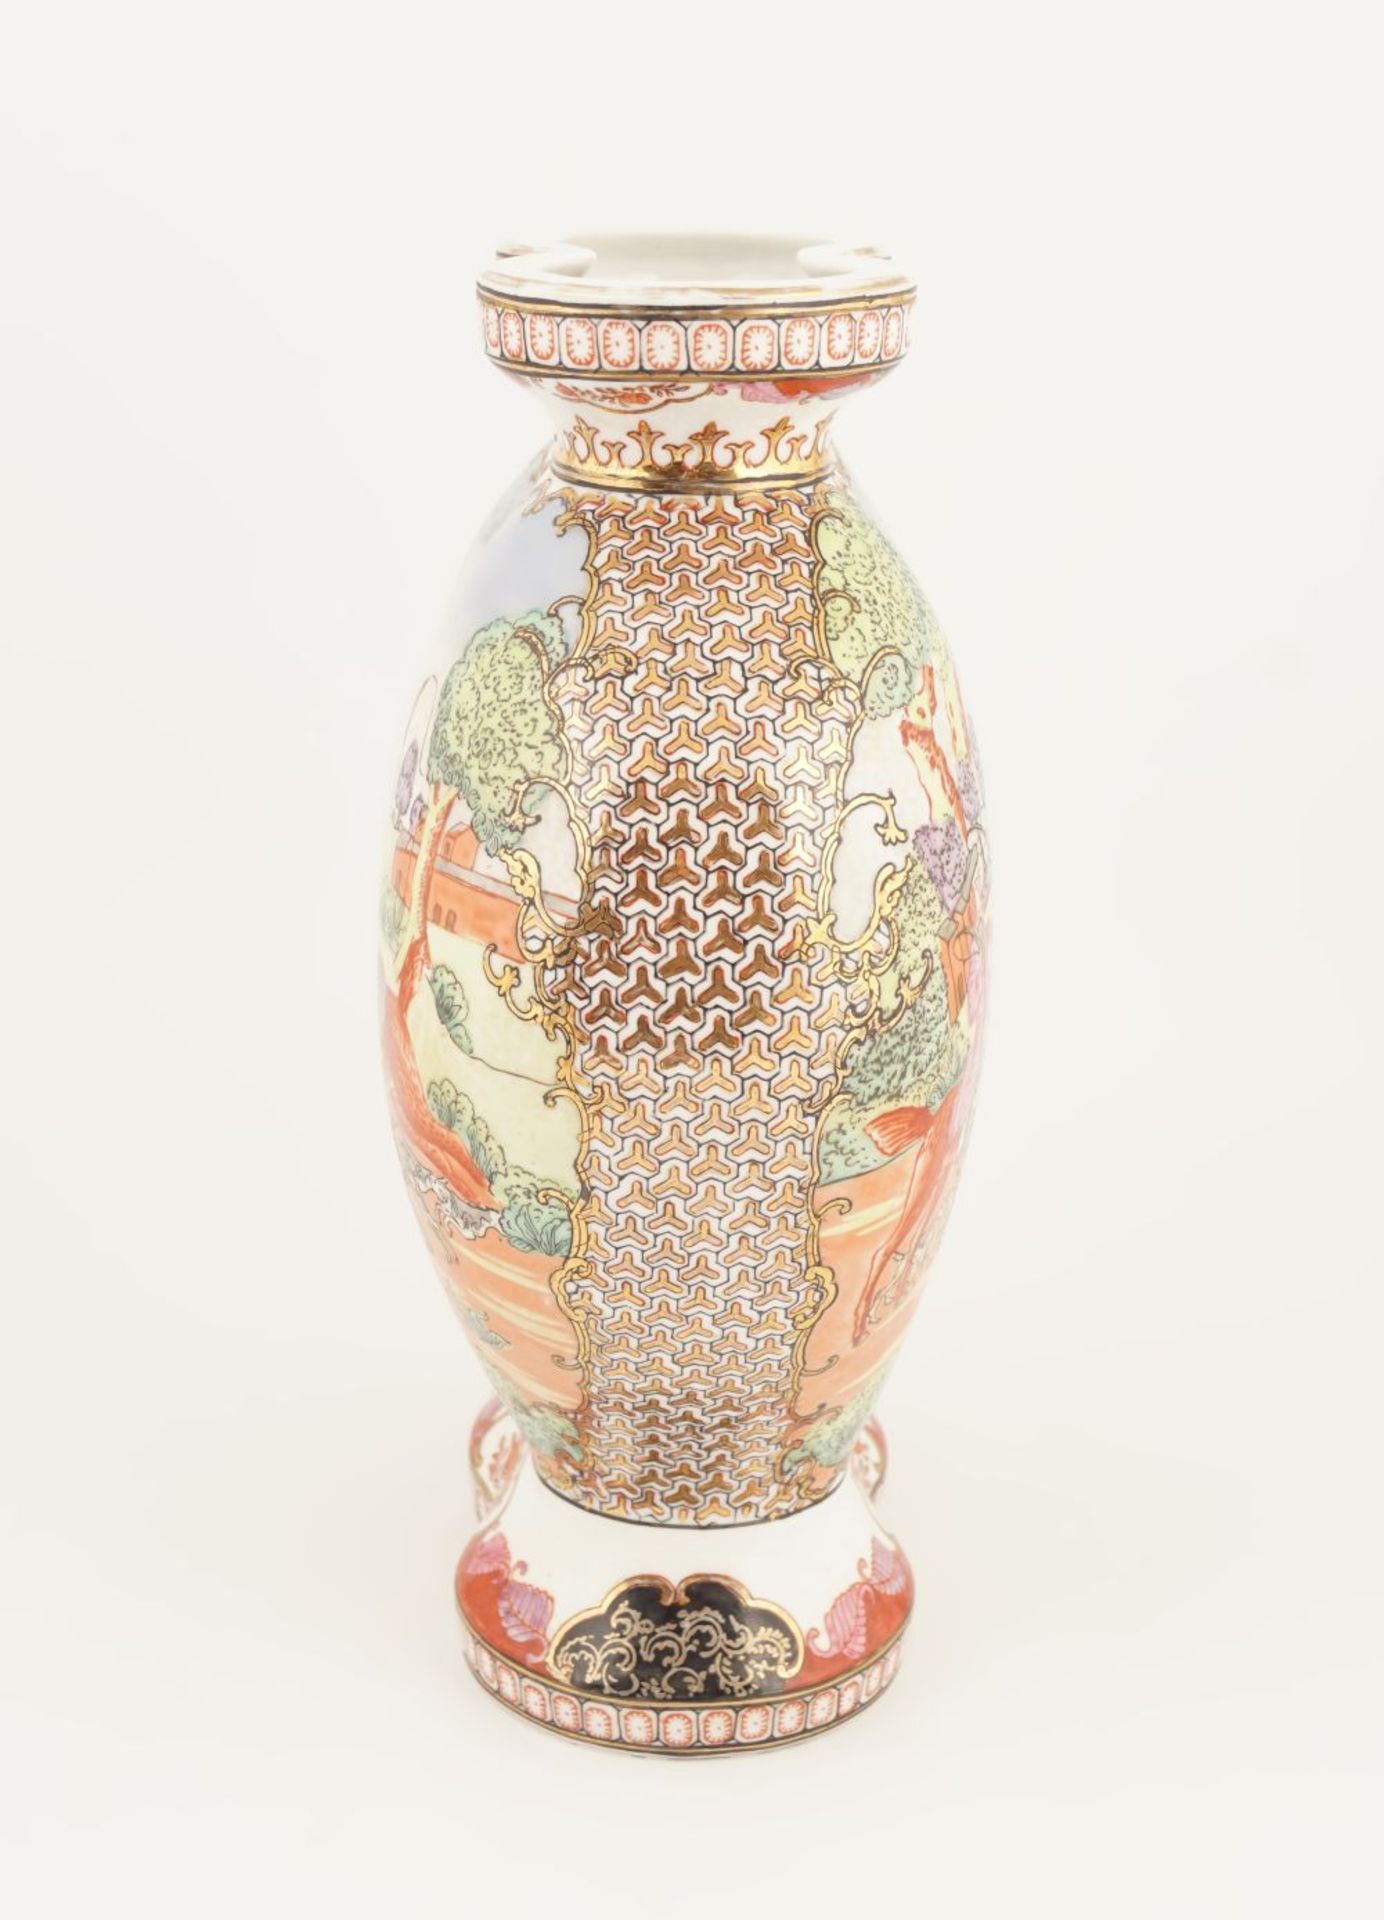 CHINESE QING EXPORT PORCELAIN VASE - Image 4 of 4